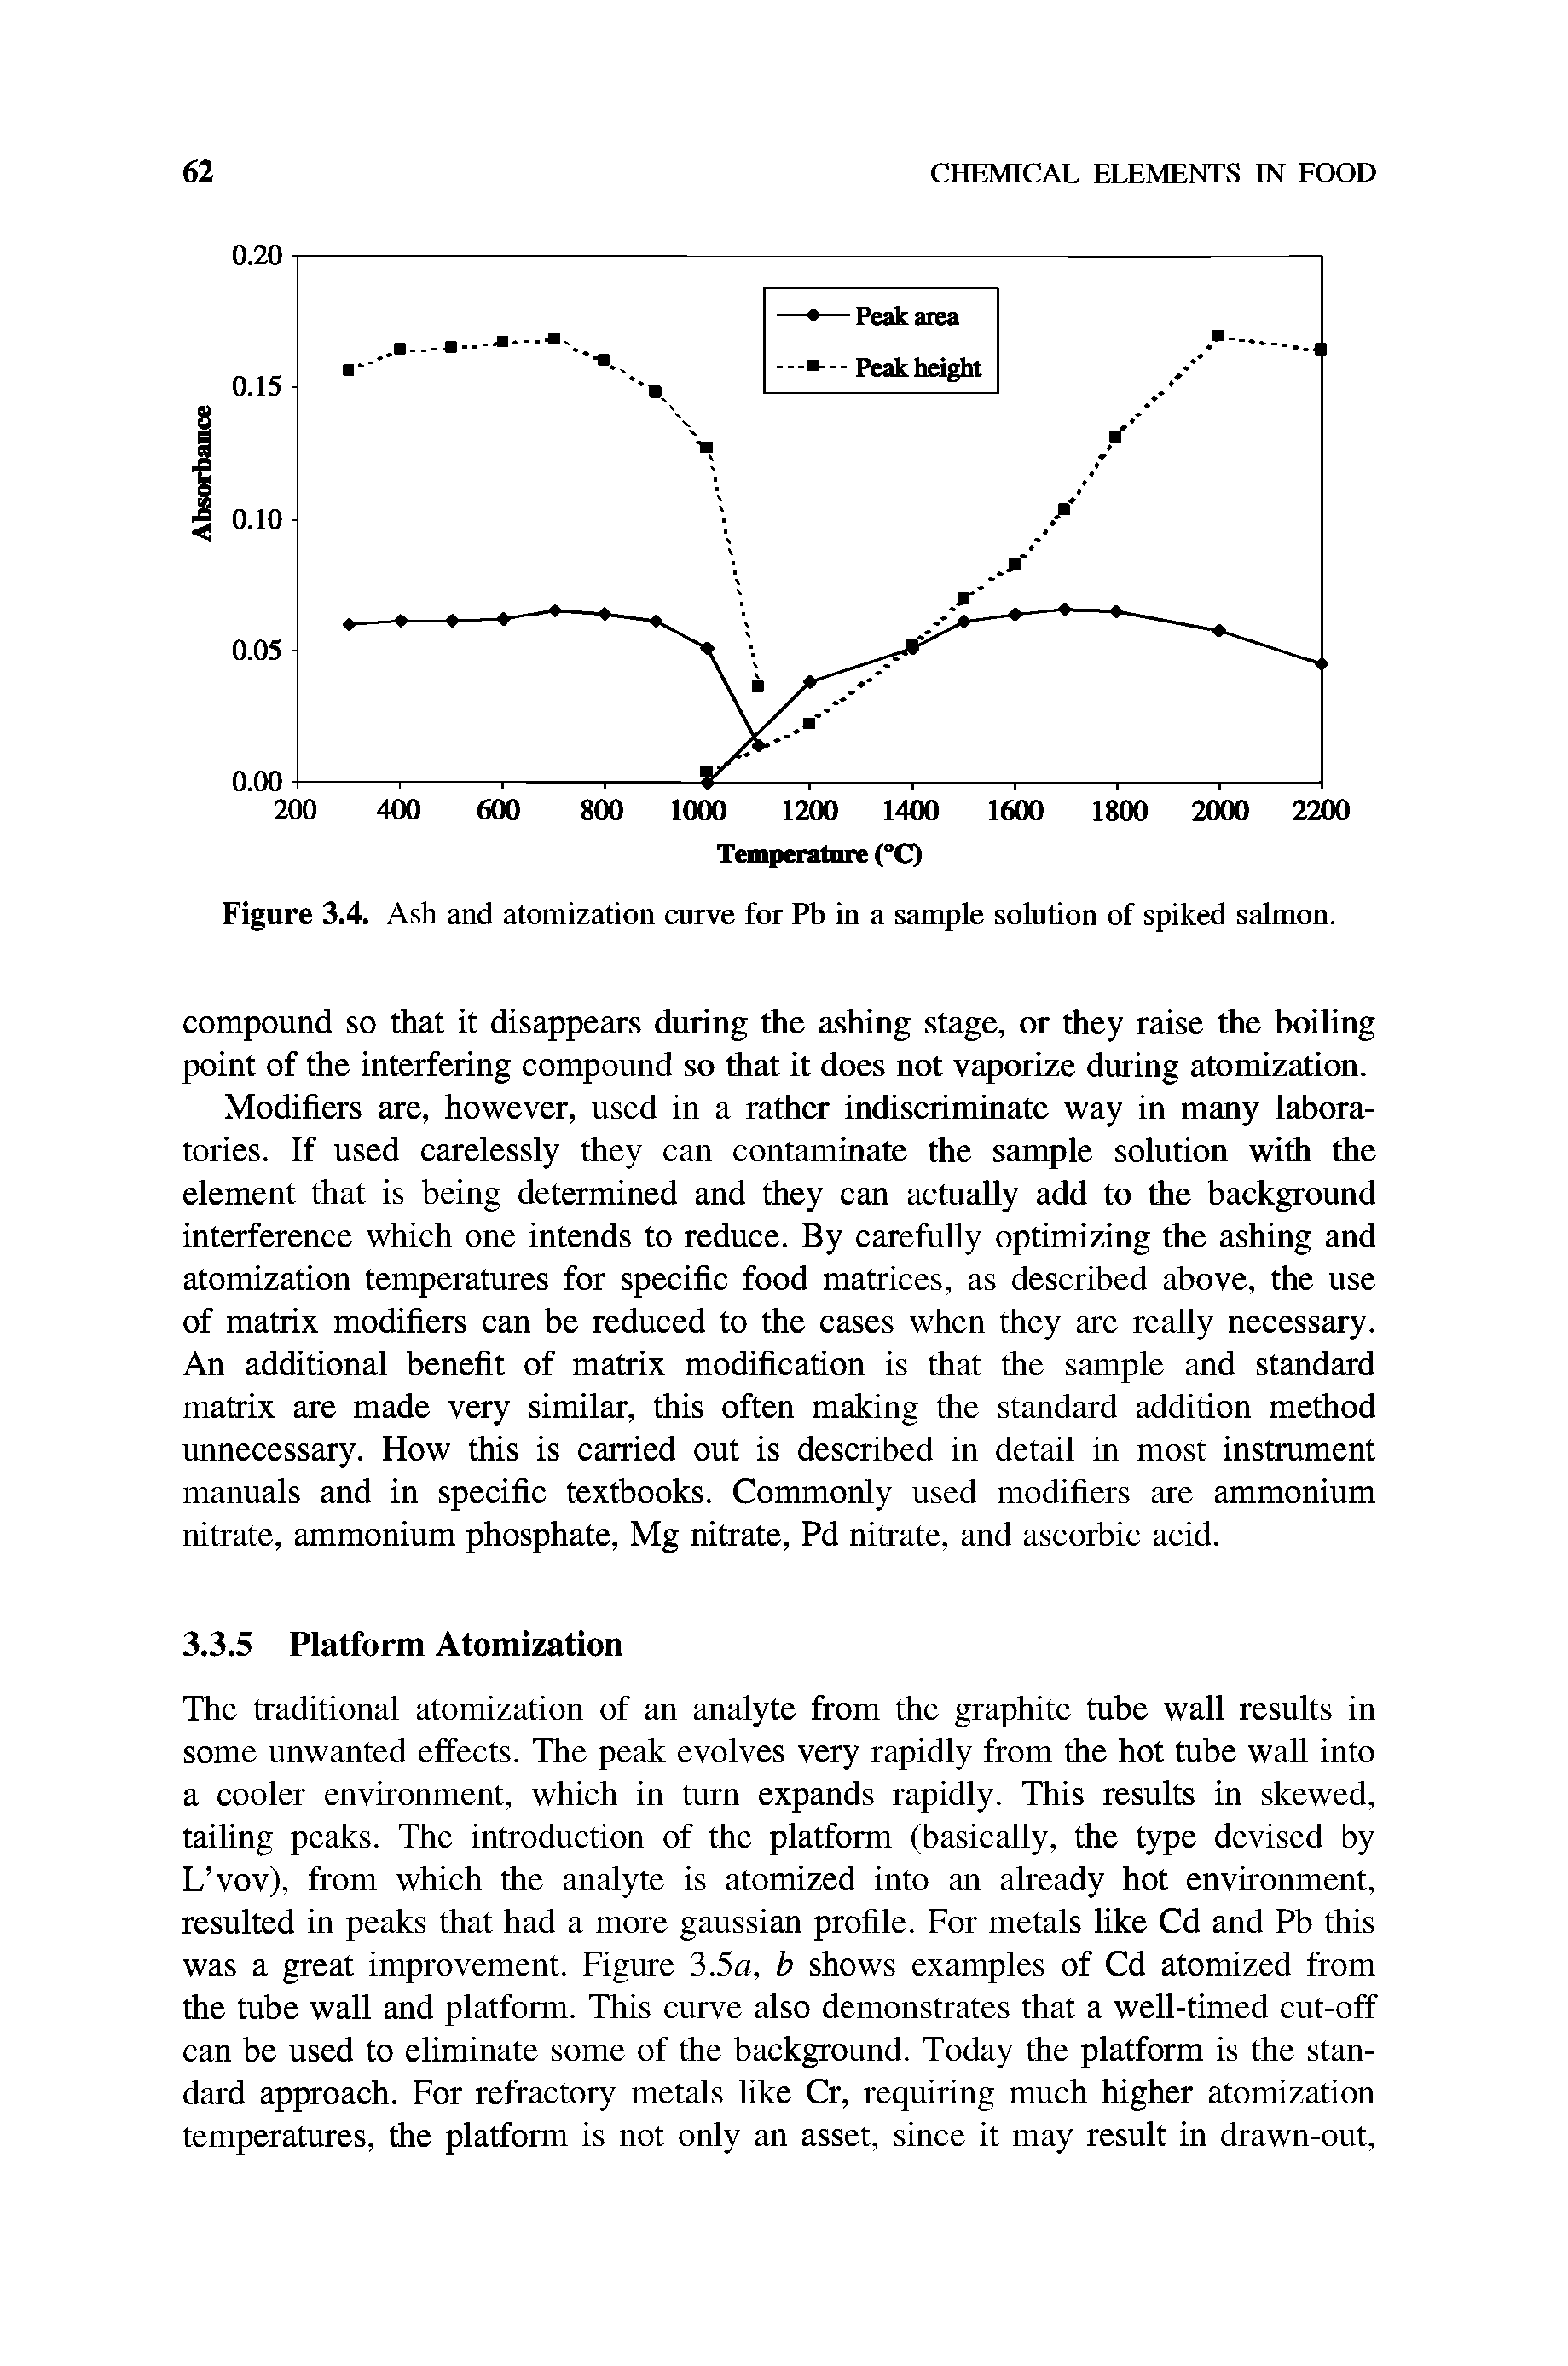 Figure 3.4. Ash and atomization curve for Pb in a sample solution of spiked salmon.